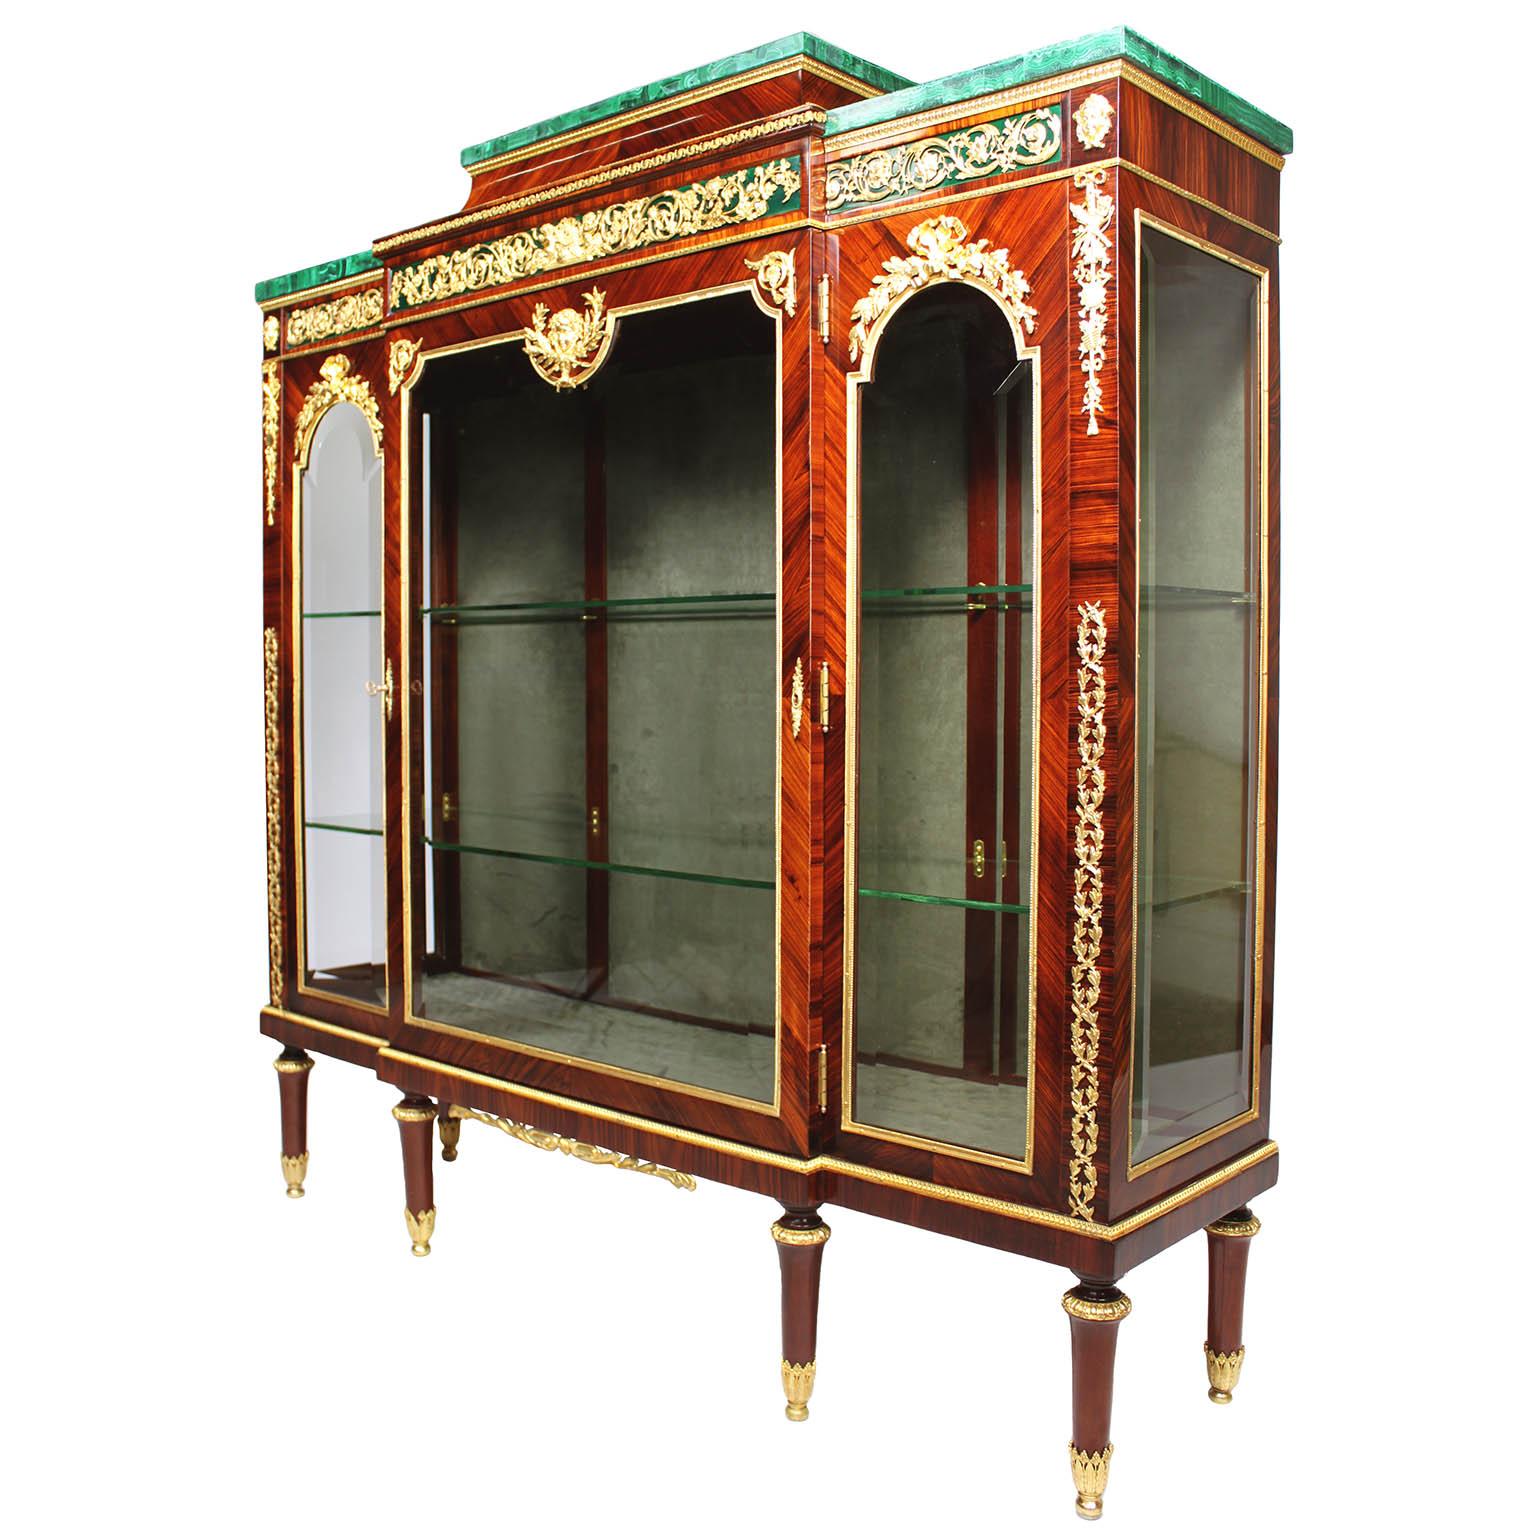 A very fine 19th century Louis XVI style gilt bronze and gilt metal mounted rosewood vitrine cabinet with malachite tops, by Pierre E. Guerin (1843-1911), in the manner of François Linke (1855-1946). The slender single-glazed front door tri-level